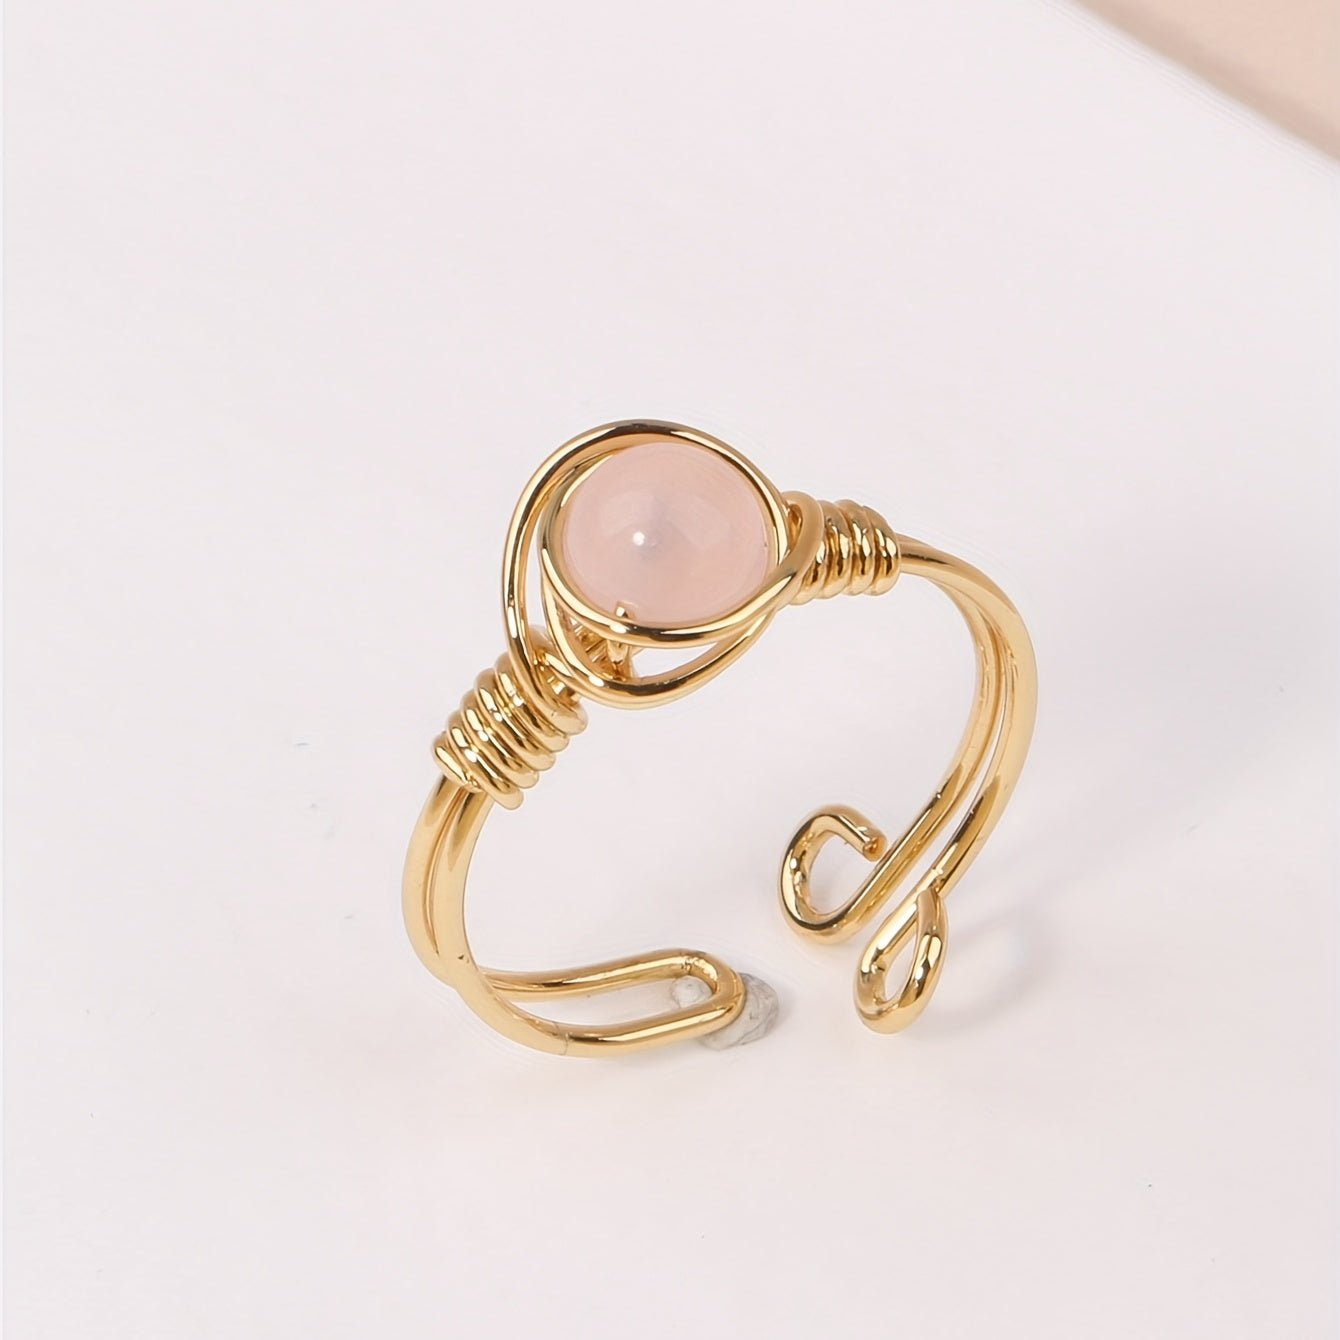 Healing Crystal Open Ring Women Irregular Crystal Wire Wrapped Ring Adjustable Finger Ring